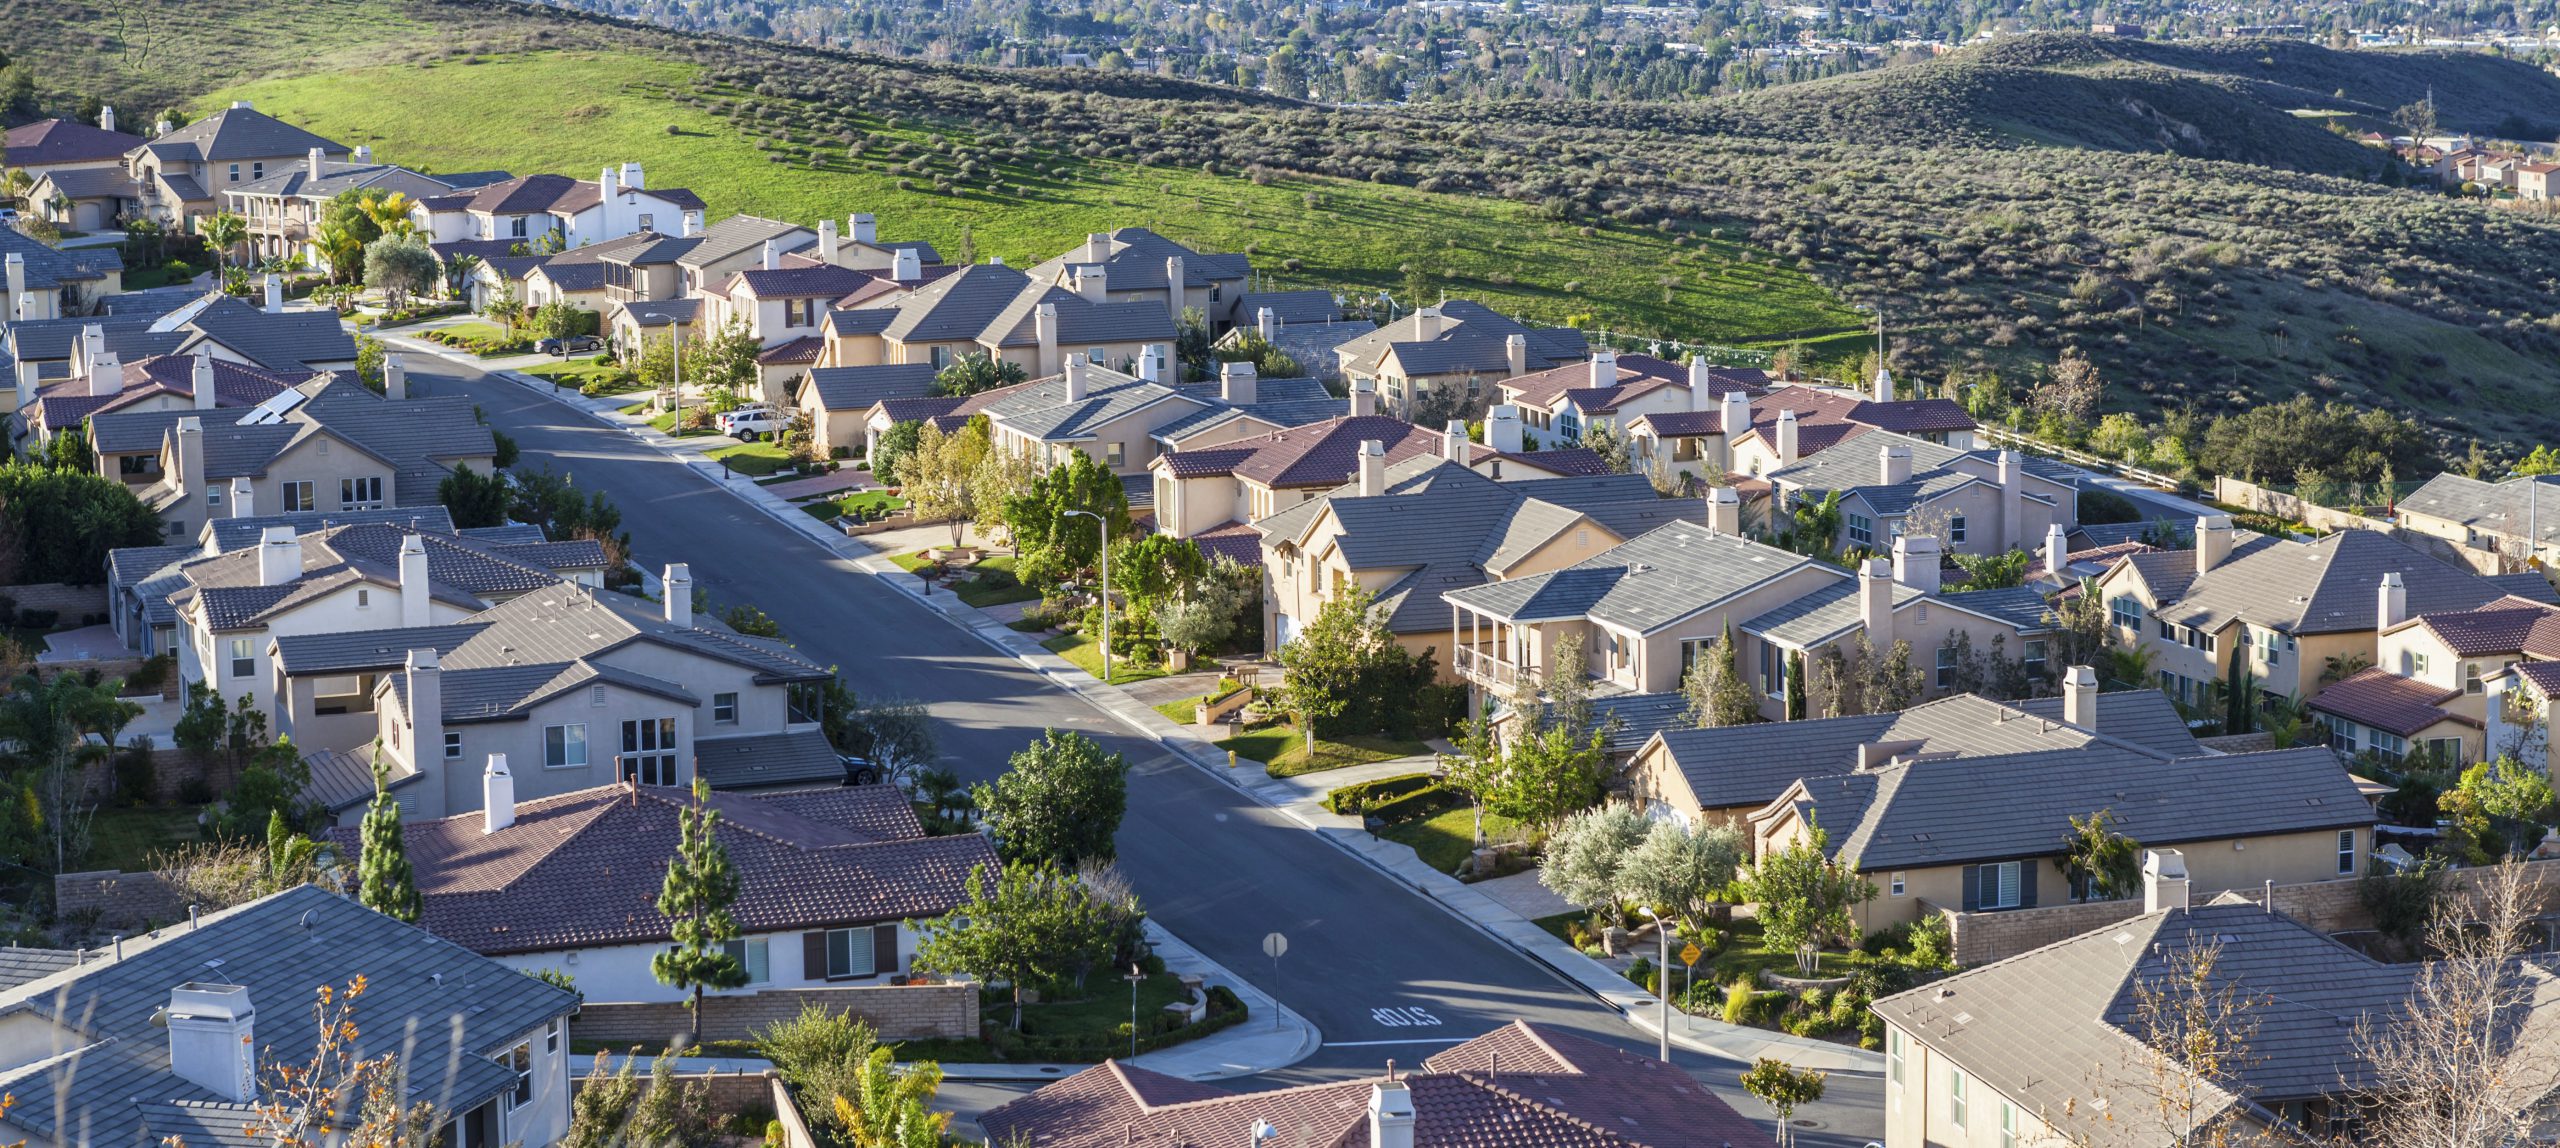 Early morning view of hillside California suburban housing in Simi Valley near Los Angeles.